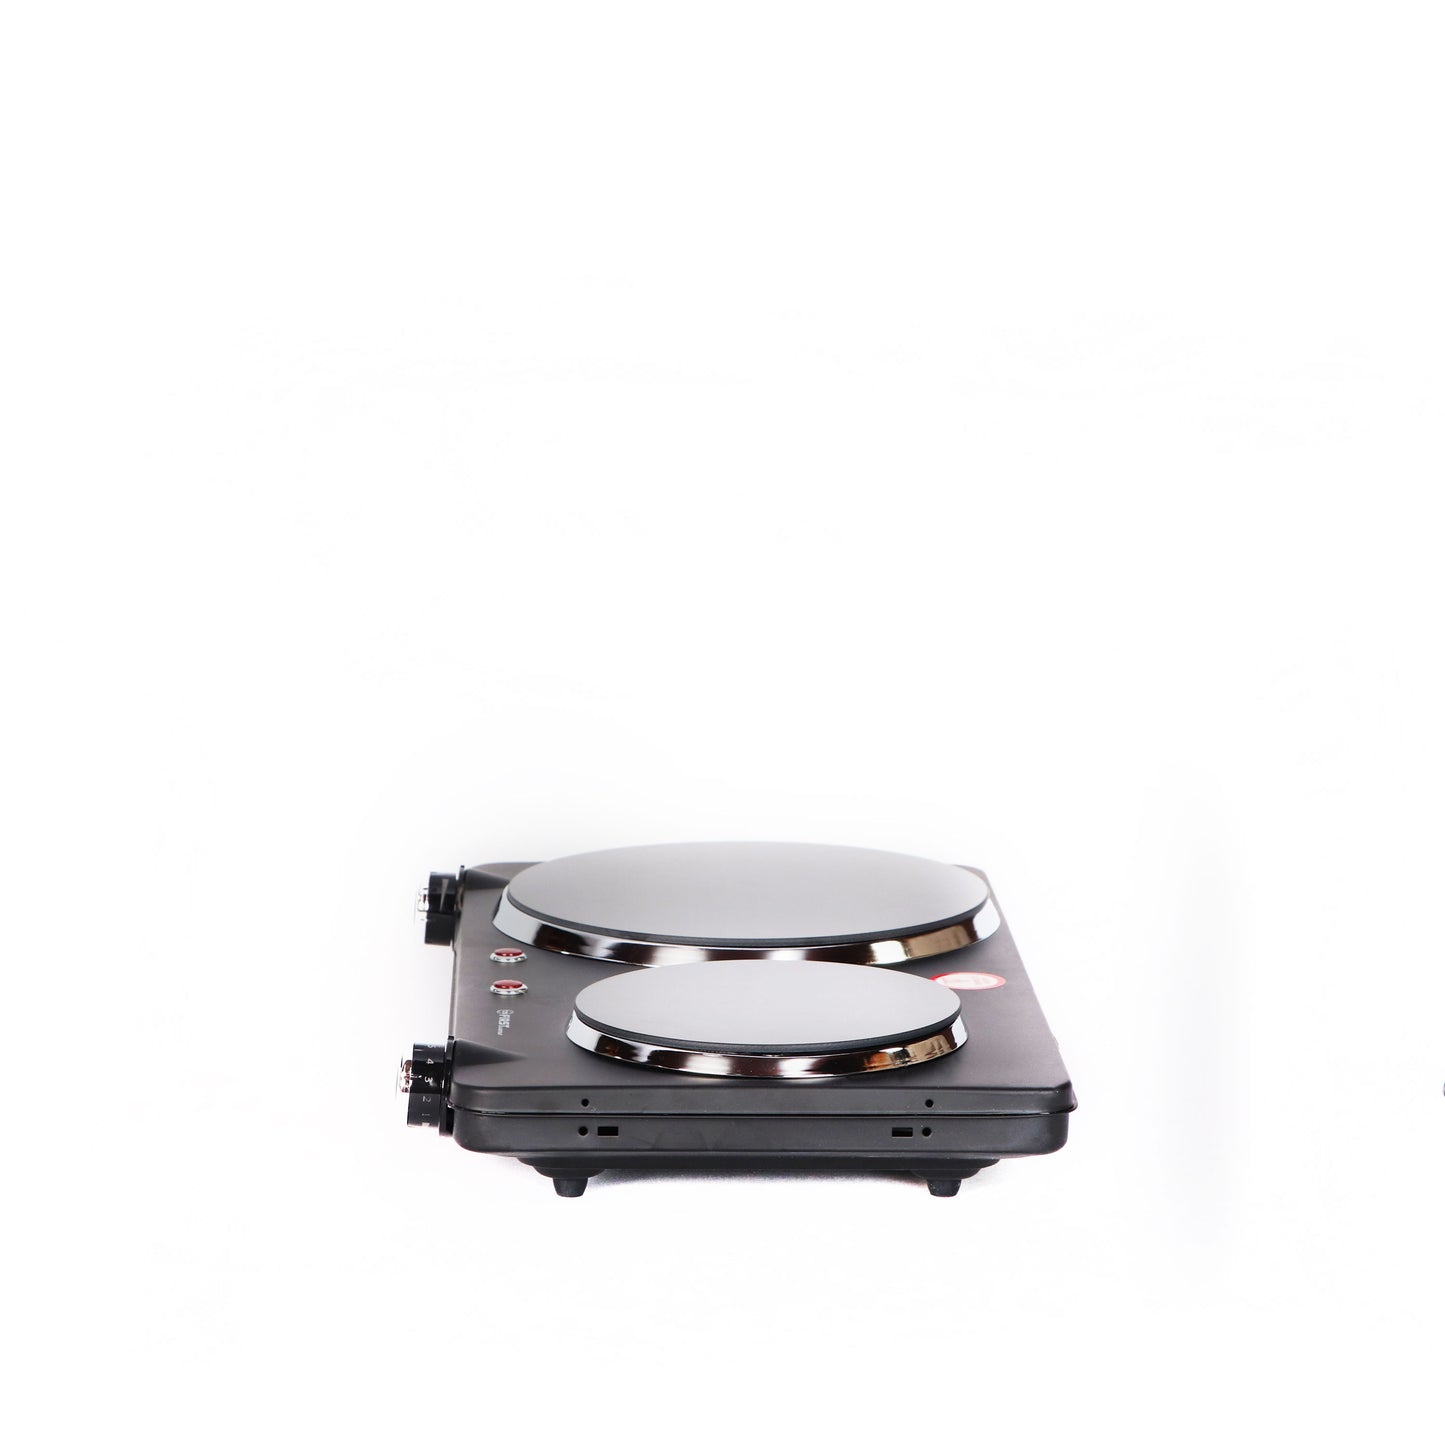 TZS First Hotplate / Infrared 2500W-Royal Brands Co-